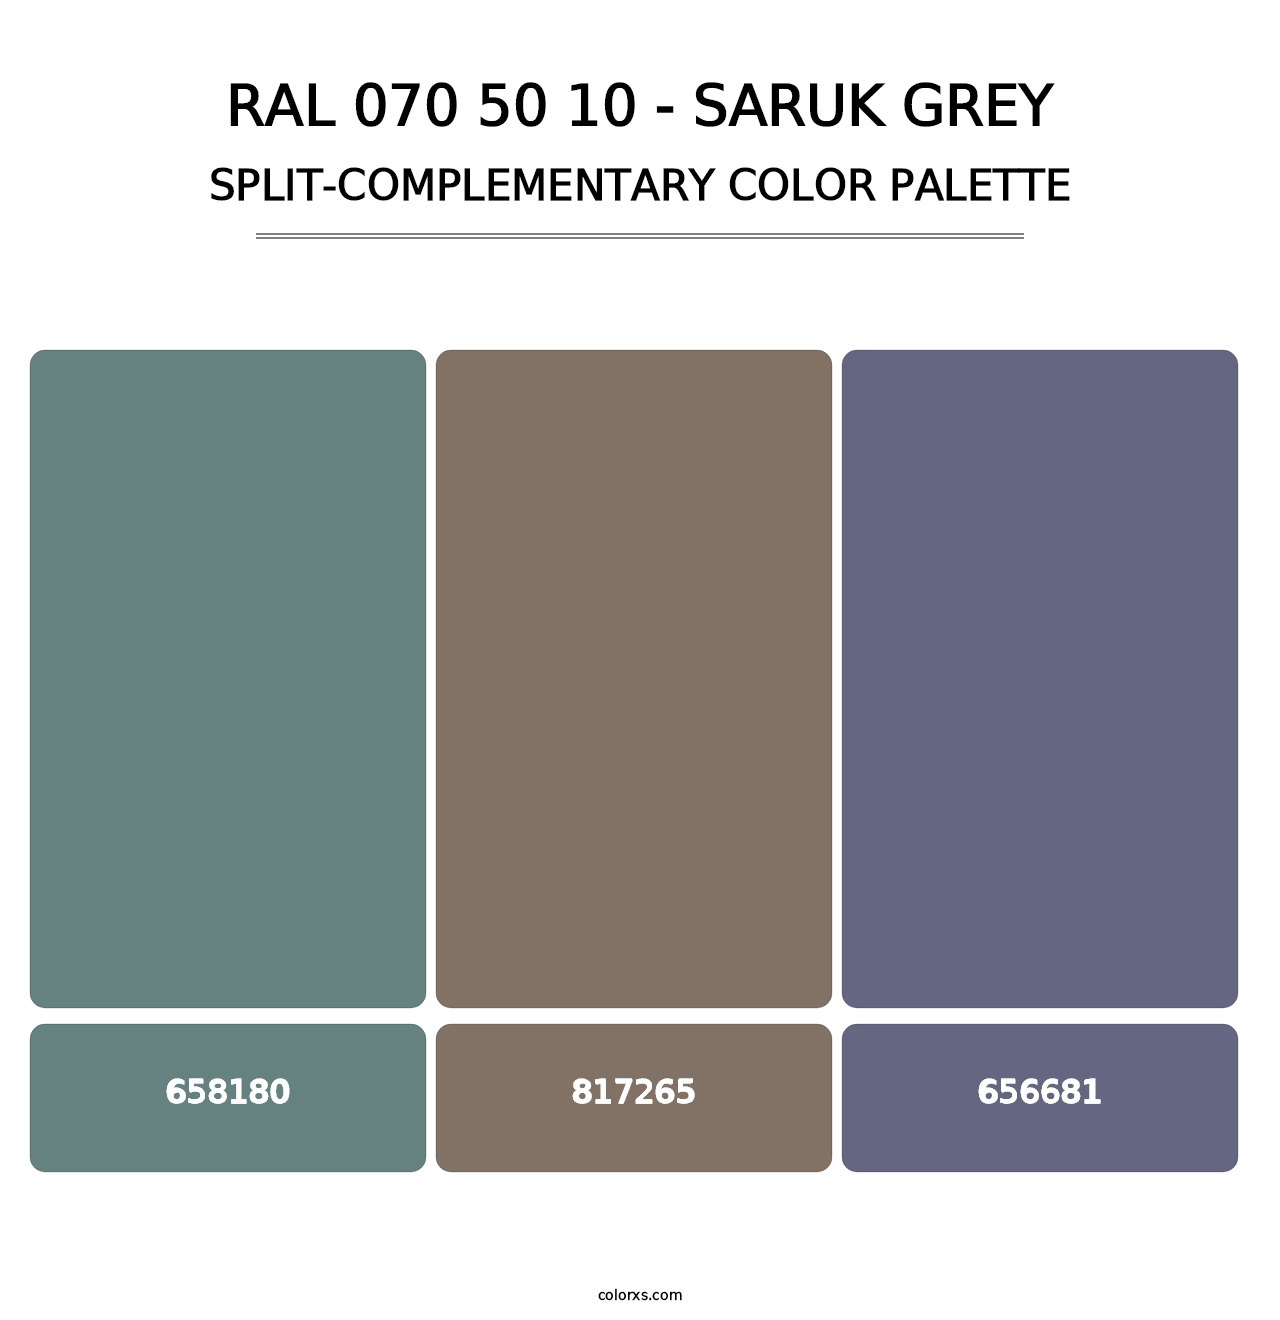 RAL 070 50 10 - Saruk Grey - Split-Complementary Color Palette